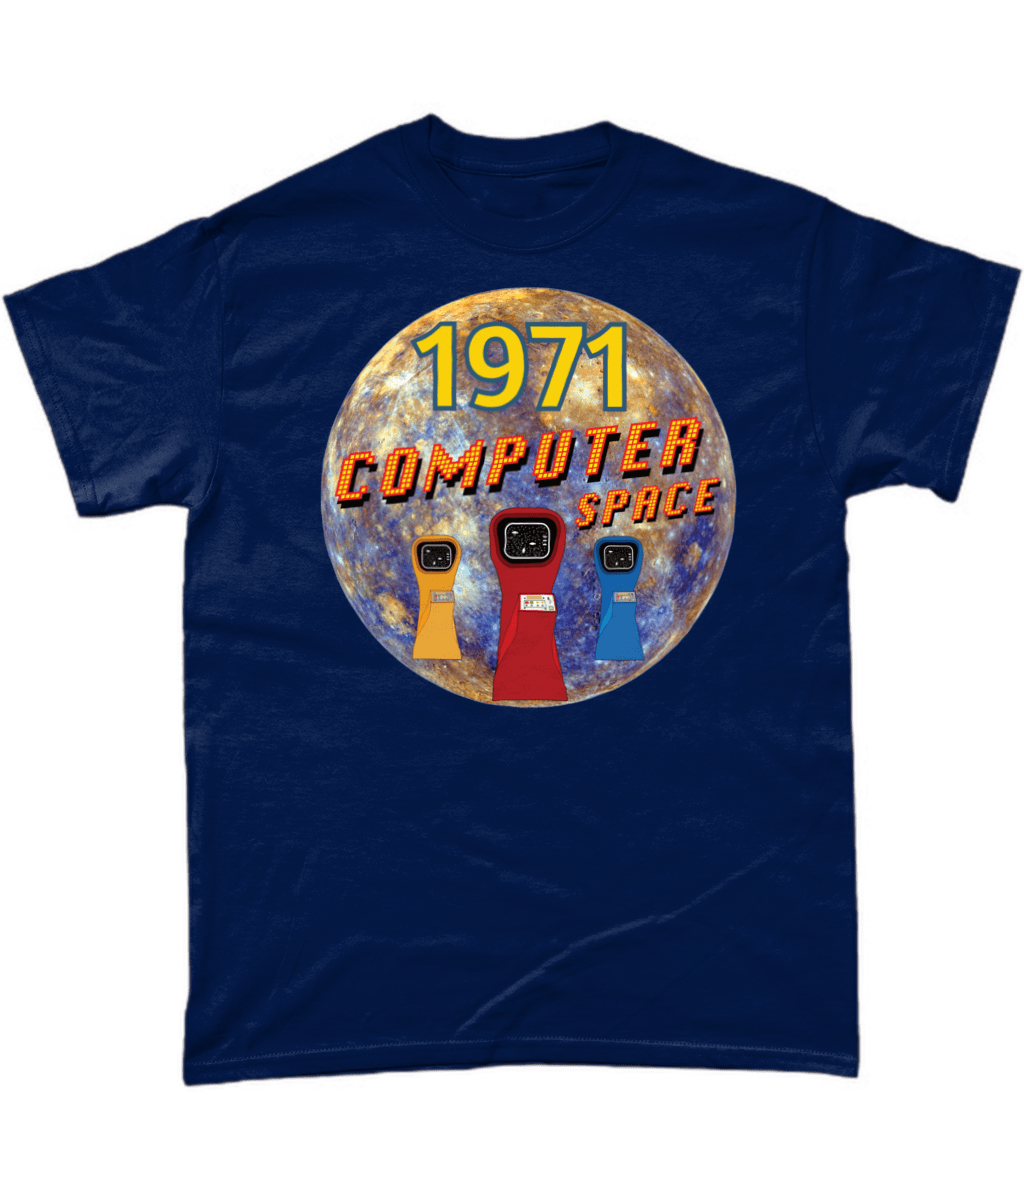 Navy T-Shirt with the words 1971,computer space,one of a kind,large earth, 3 computer space arcade game machines